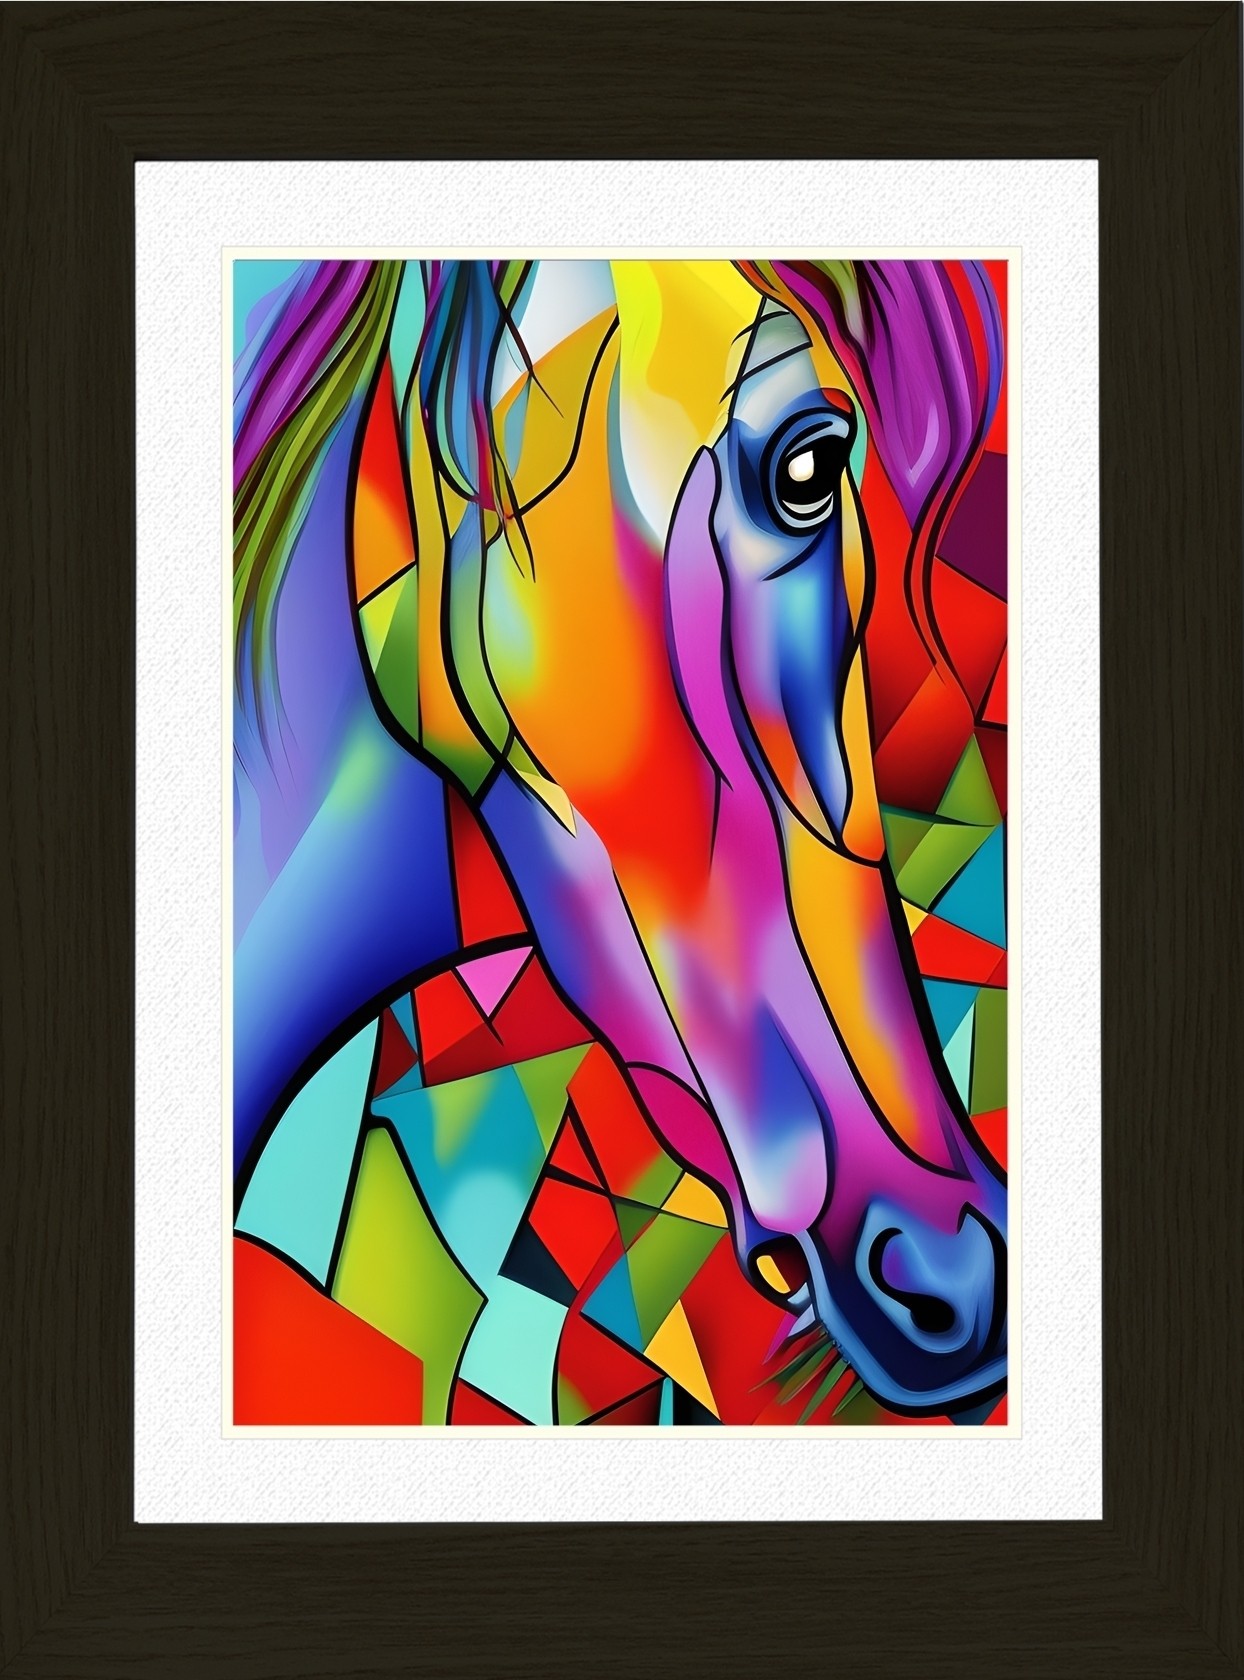 Horse Animal Picture Framed Colourful Abstract Art (25cm x 20cm Black Frame)